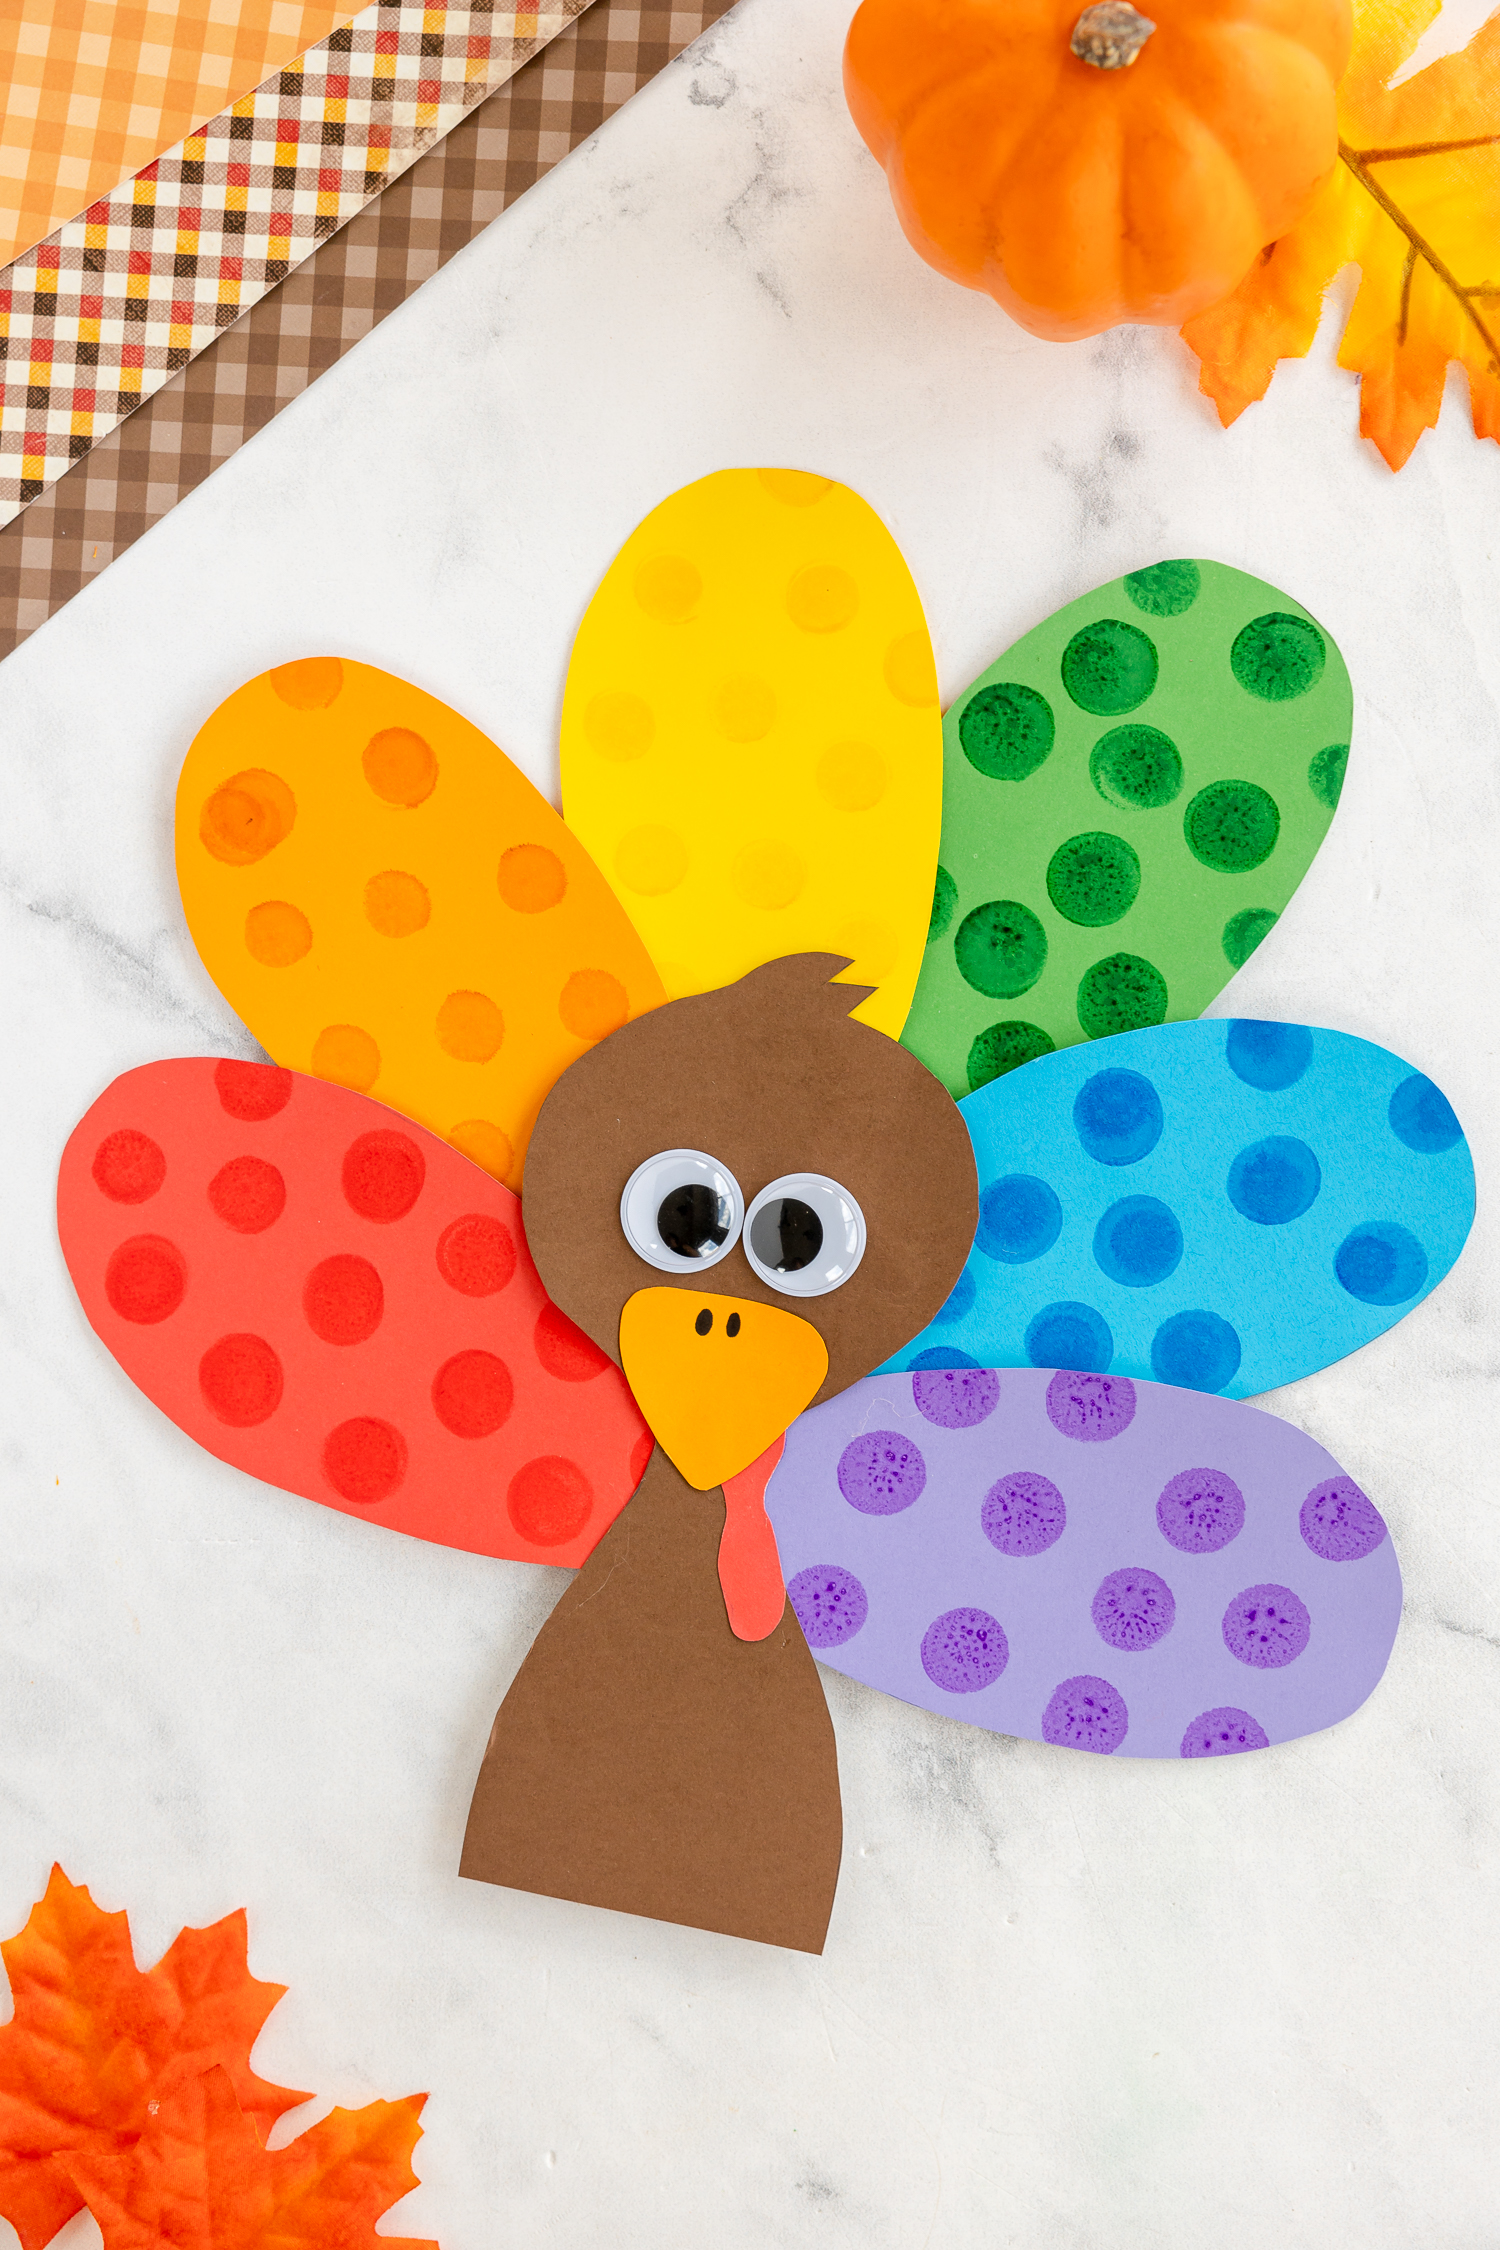 This Turkey Do a Dot is a fun Thanksgiving dot activity that is great for kids of all ages! Use Do a Dot markers to add more color to your silly turkey craft!